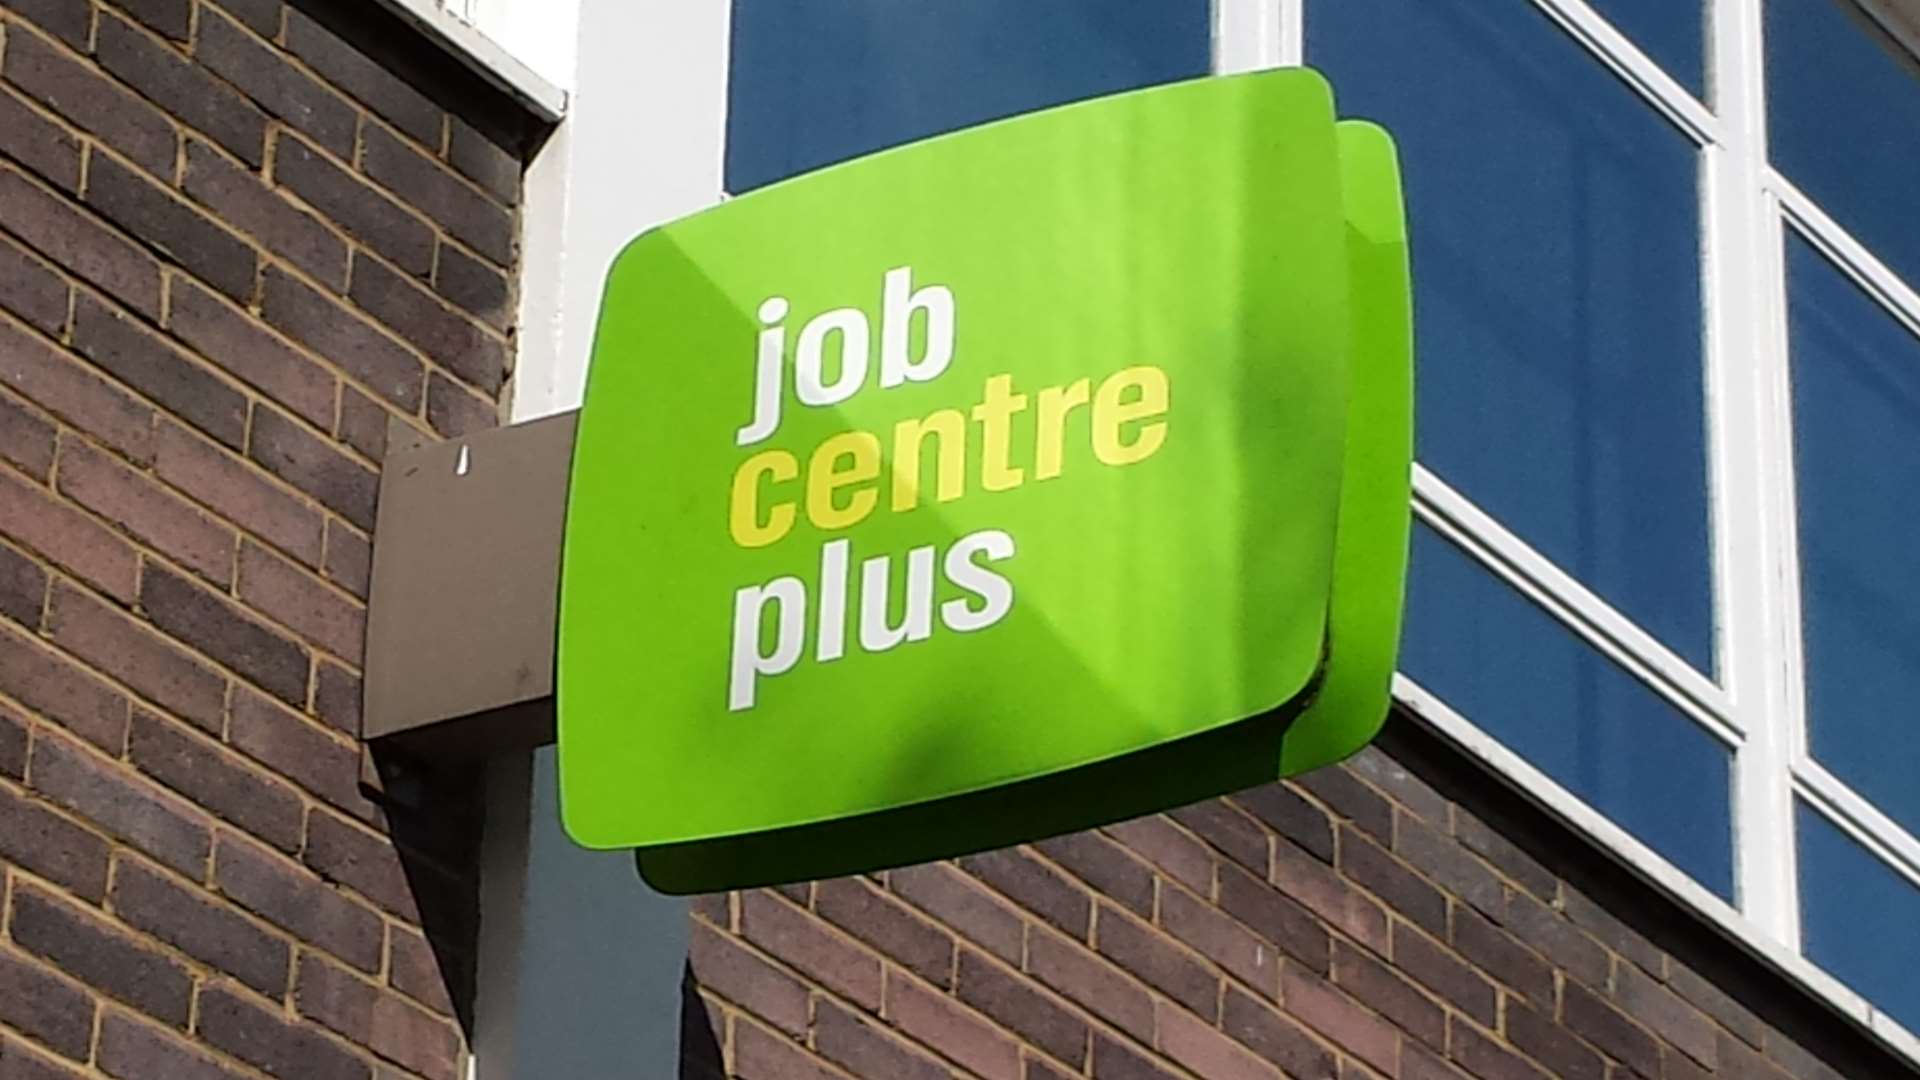 Organisations such as the Jobcentre have been preparing for the introduction of Universal Credit